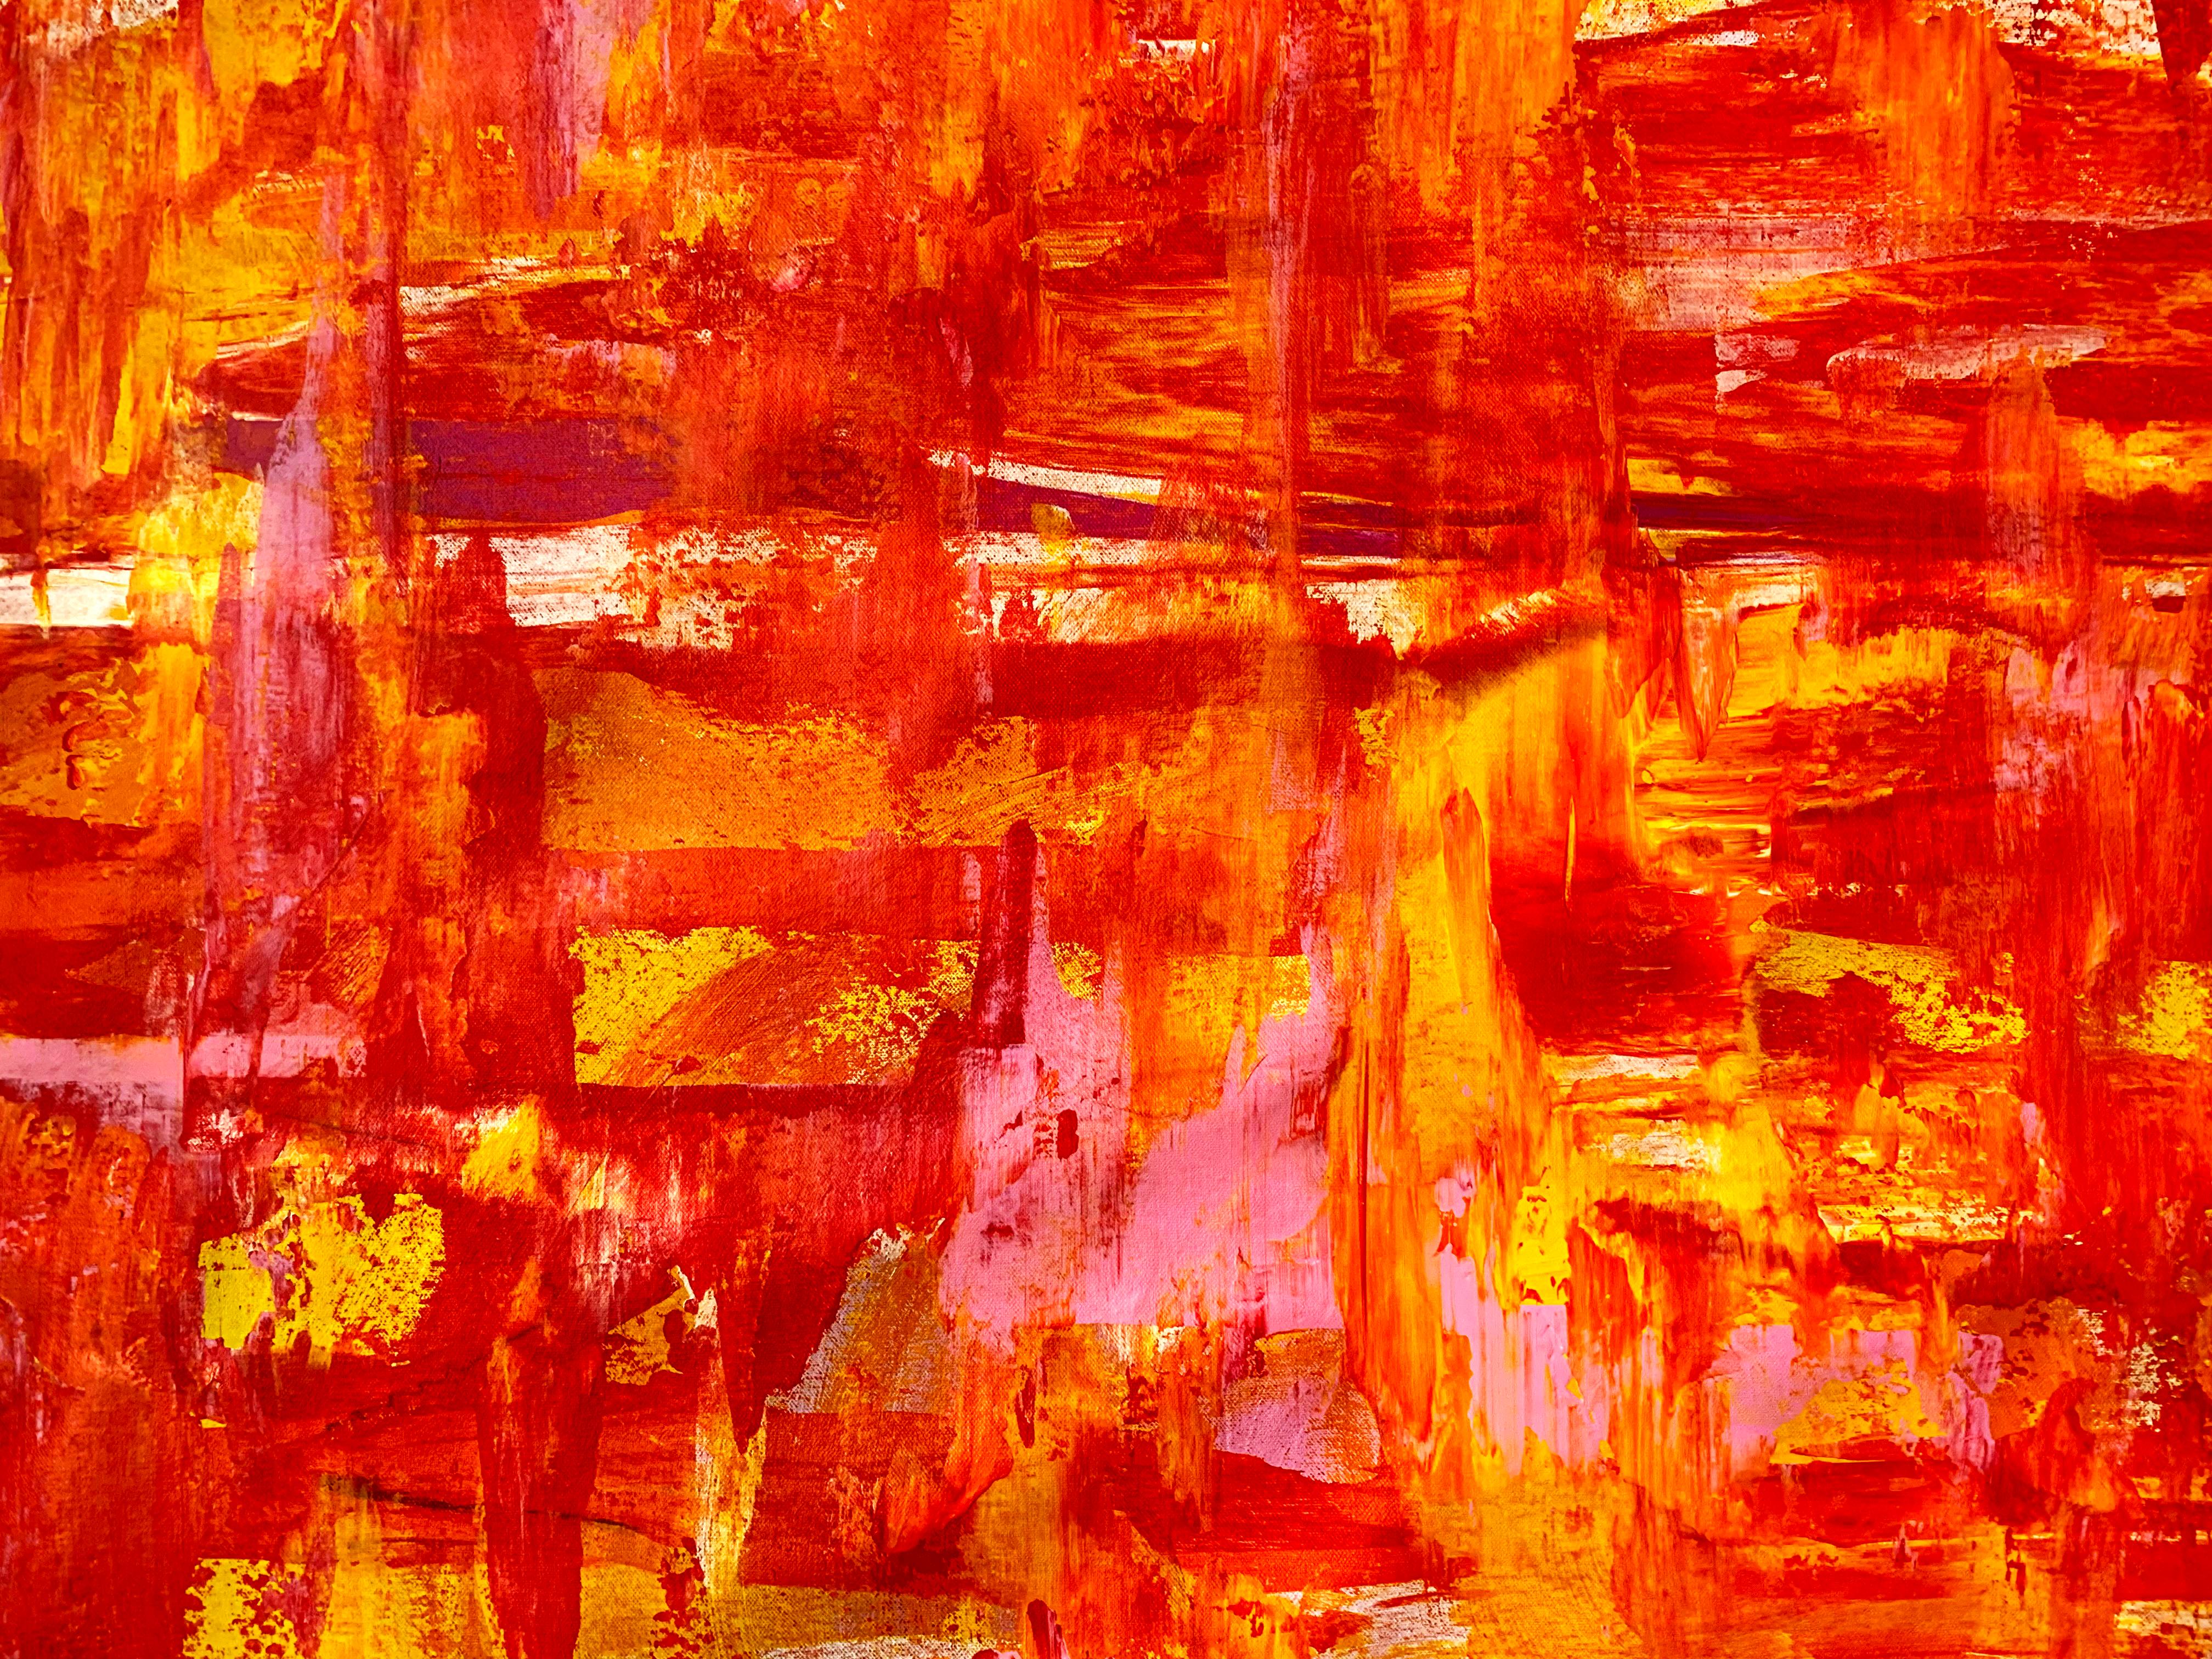 Warming - Red Abstract Painting by Estelle Asmodelle